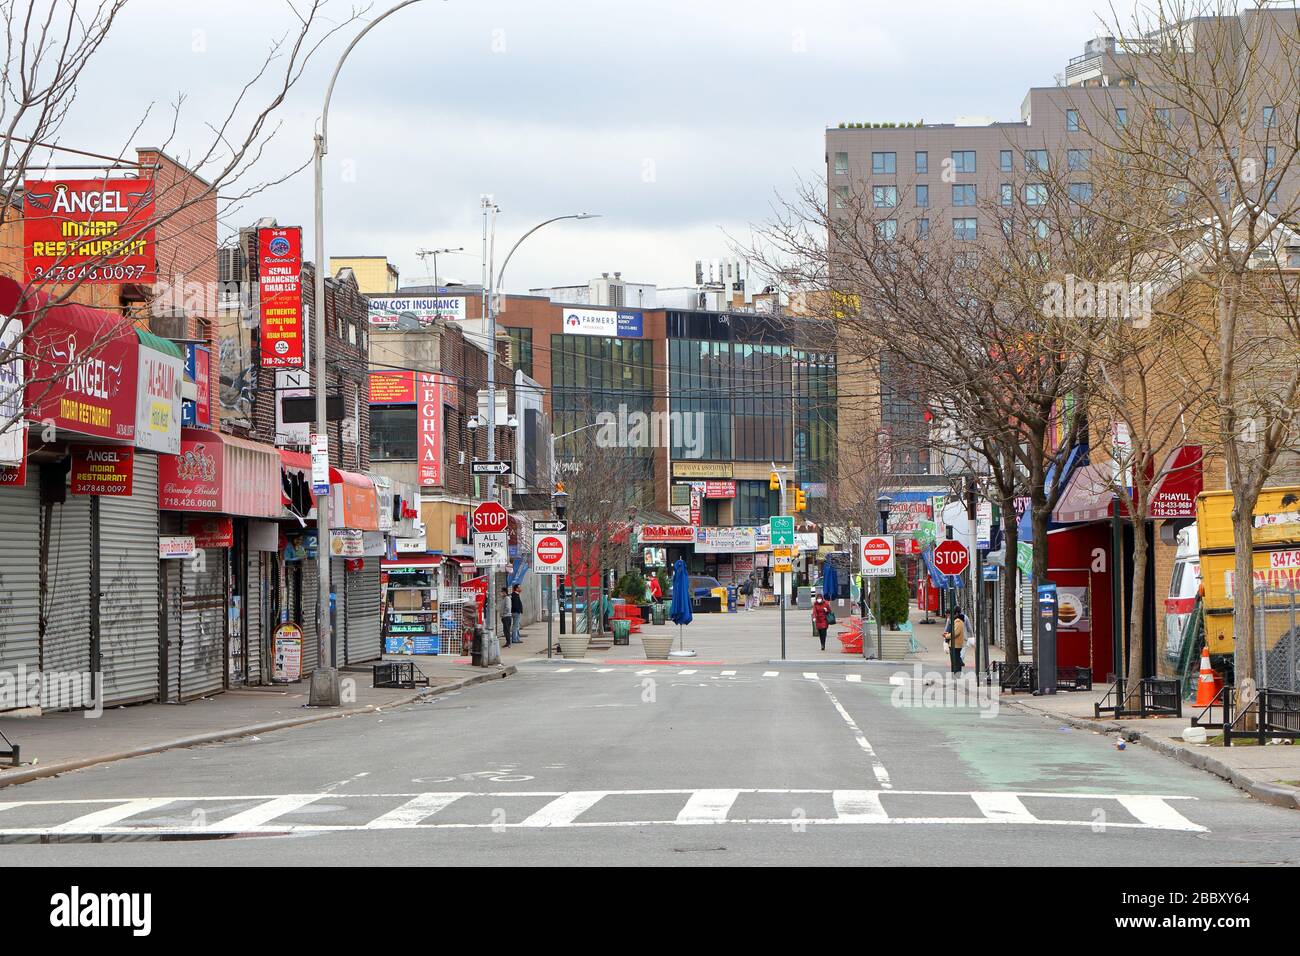 New York, NY, 31st March 2020. Shuttered storefronts along 37th Rd in Jackson Heights... SEE MORE INFO FOR FULL CAPTION Stock Photo